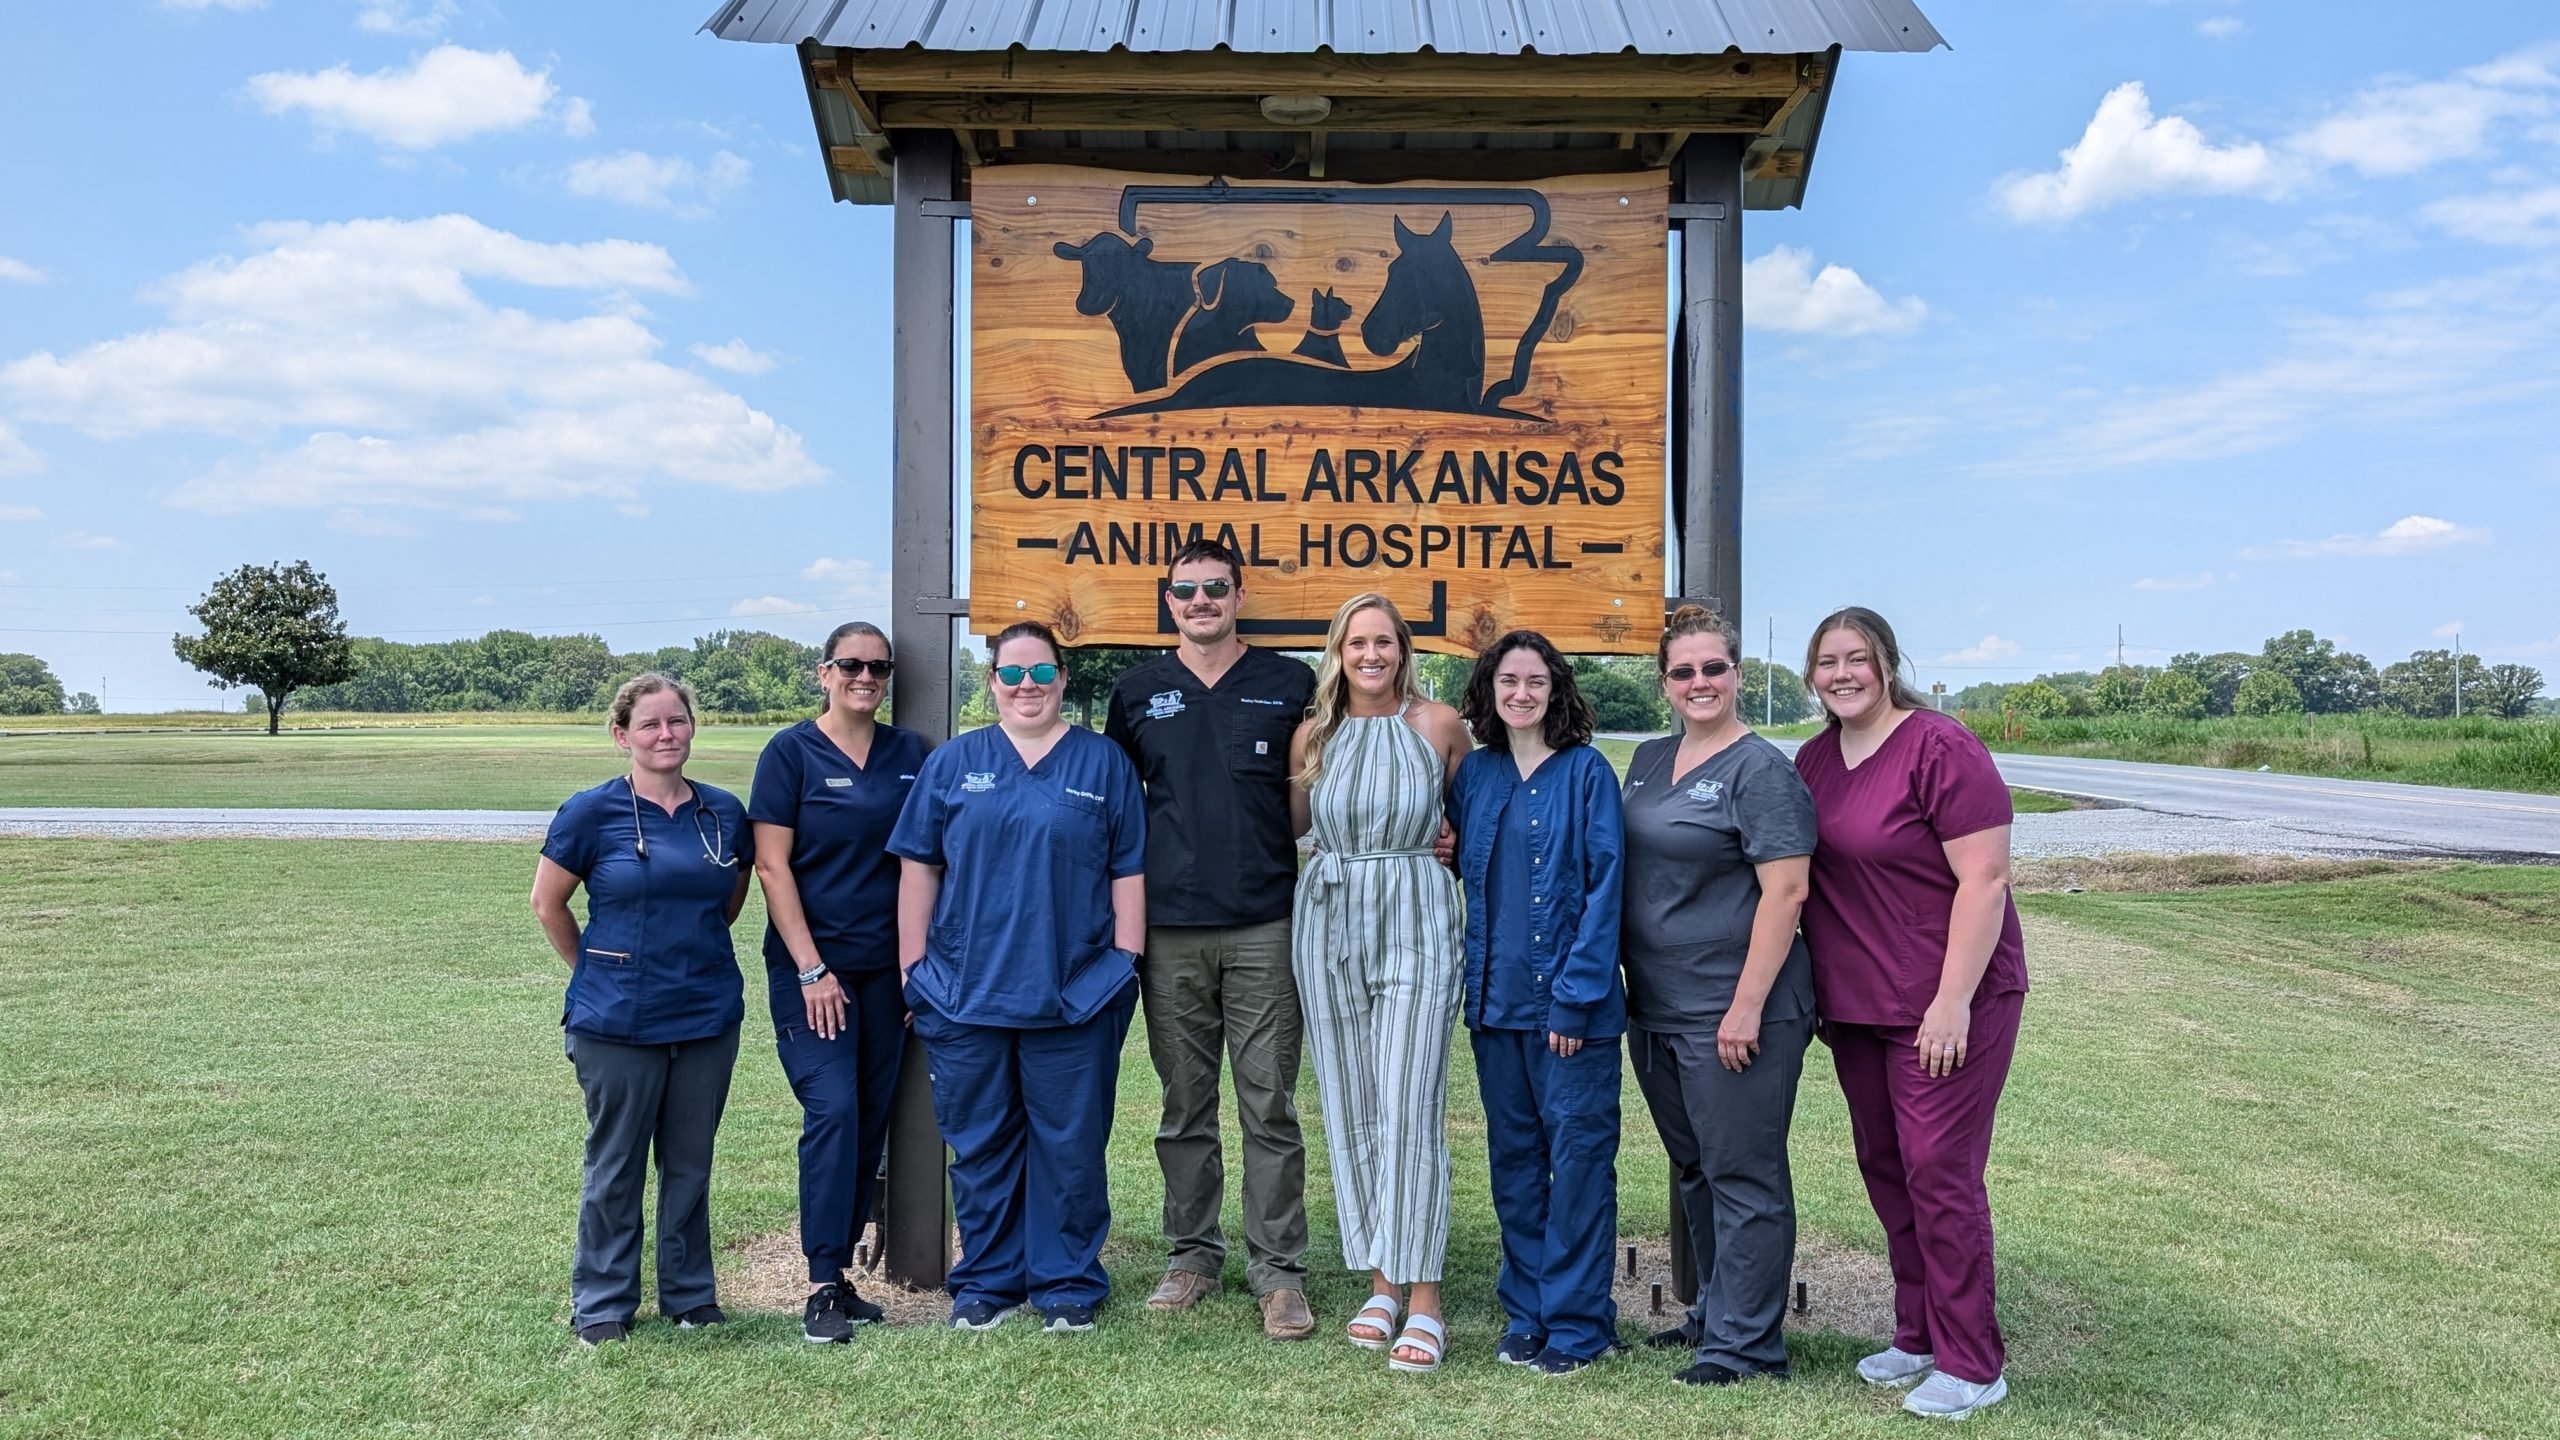 Building Trust and Community: The McMullens' Mission at Central Arkansas Animal Hospital